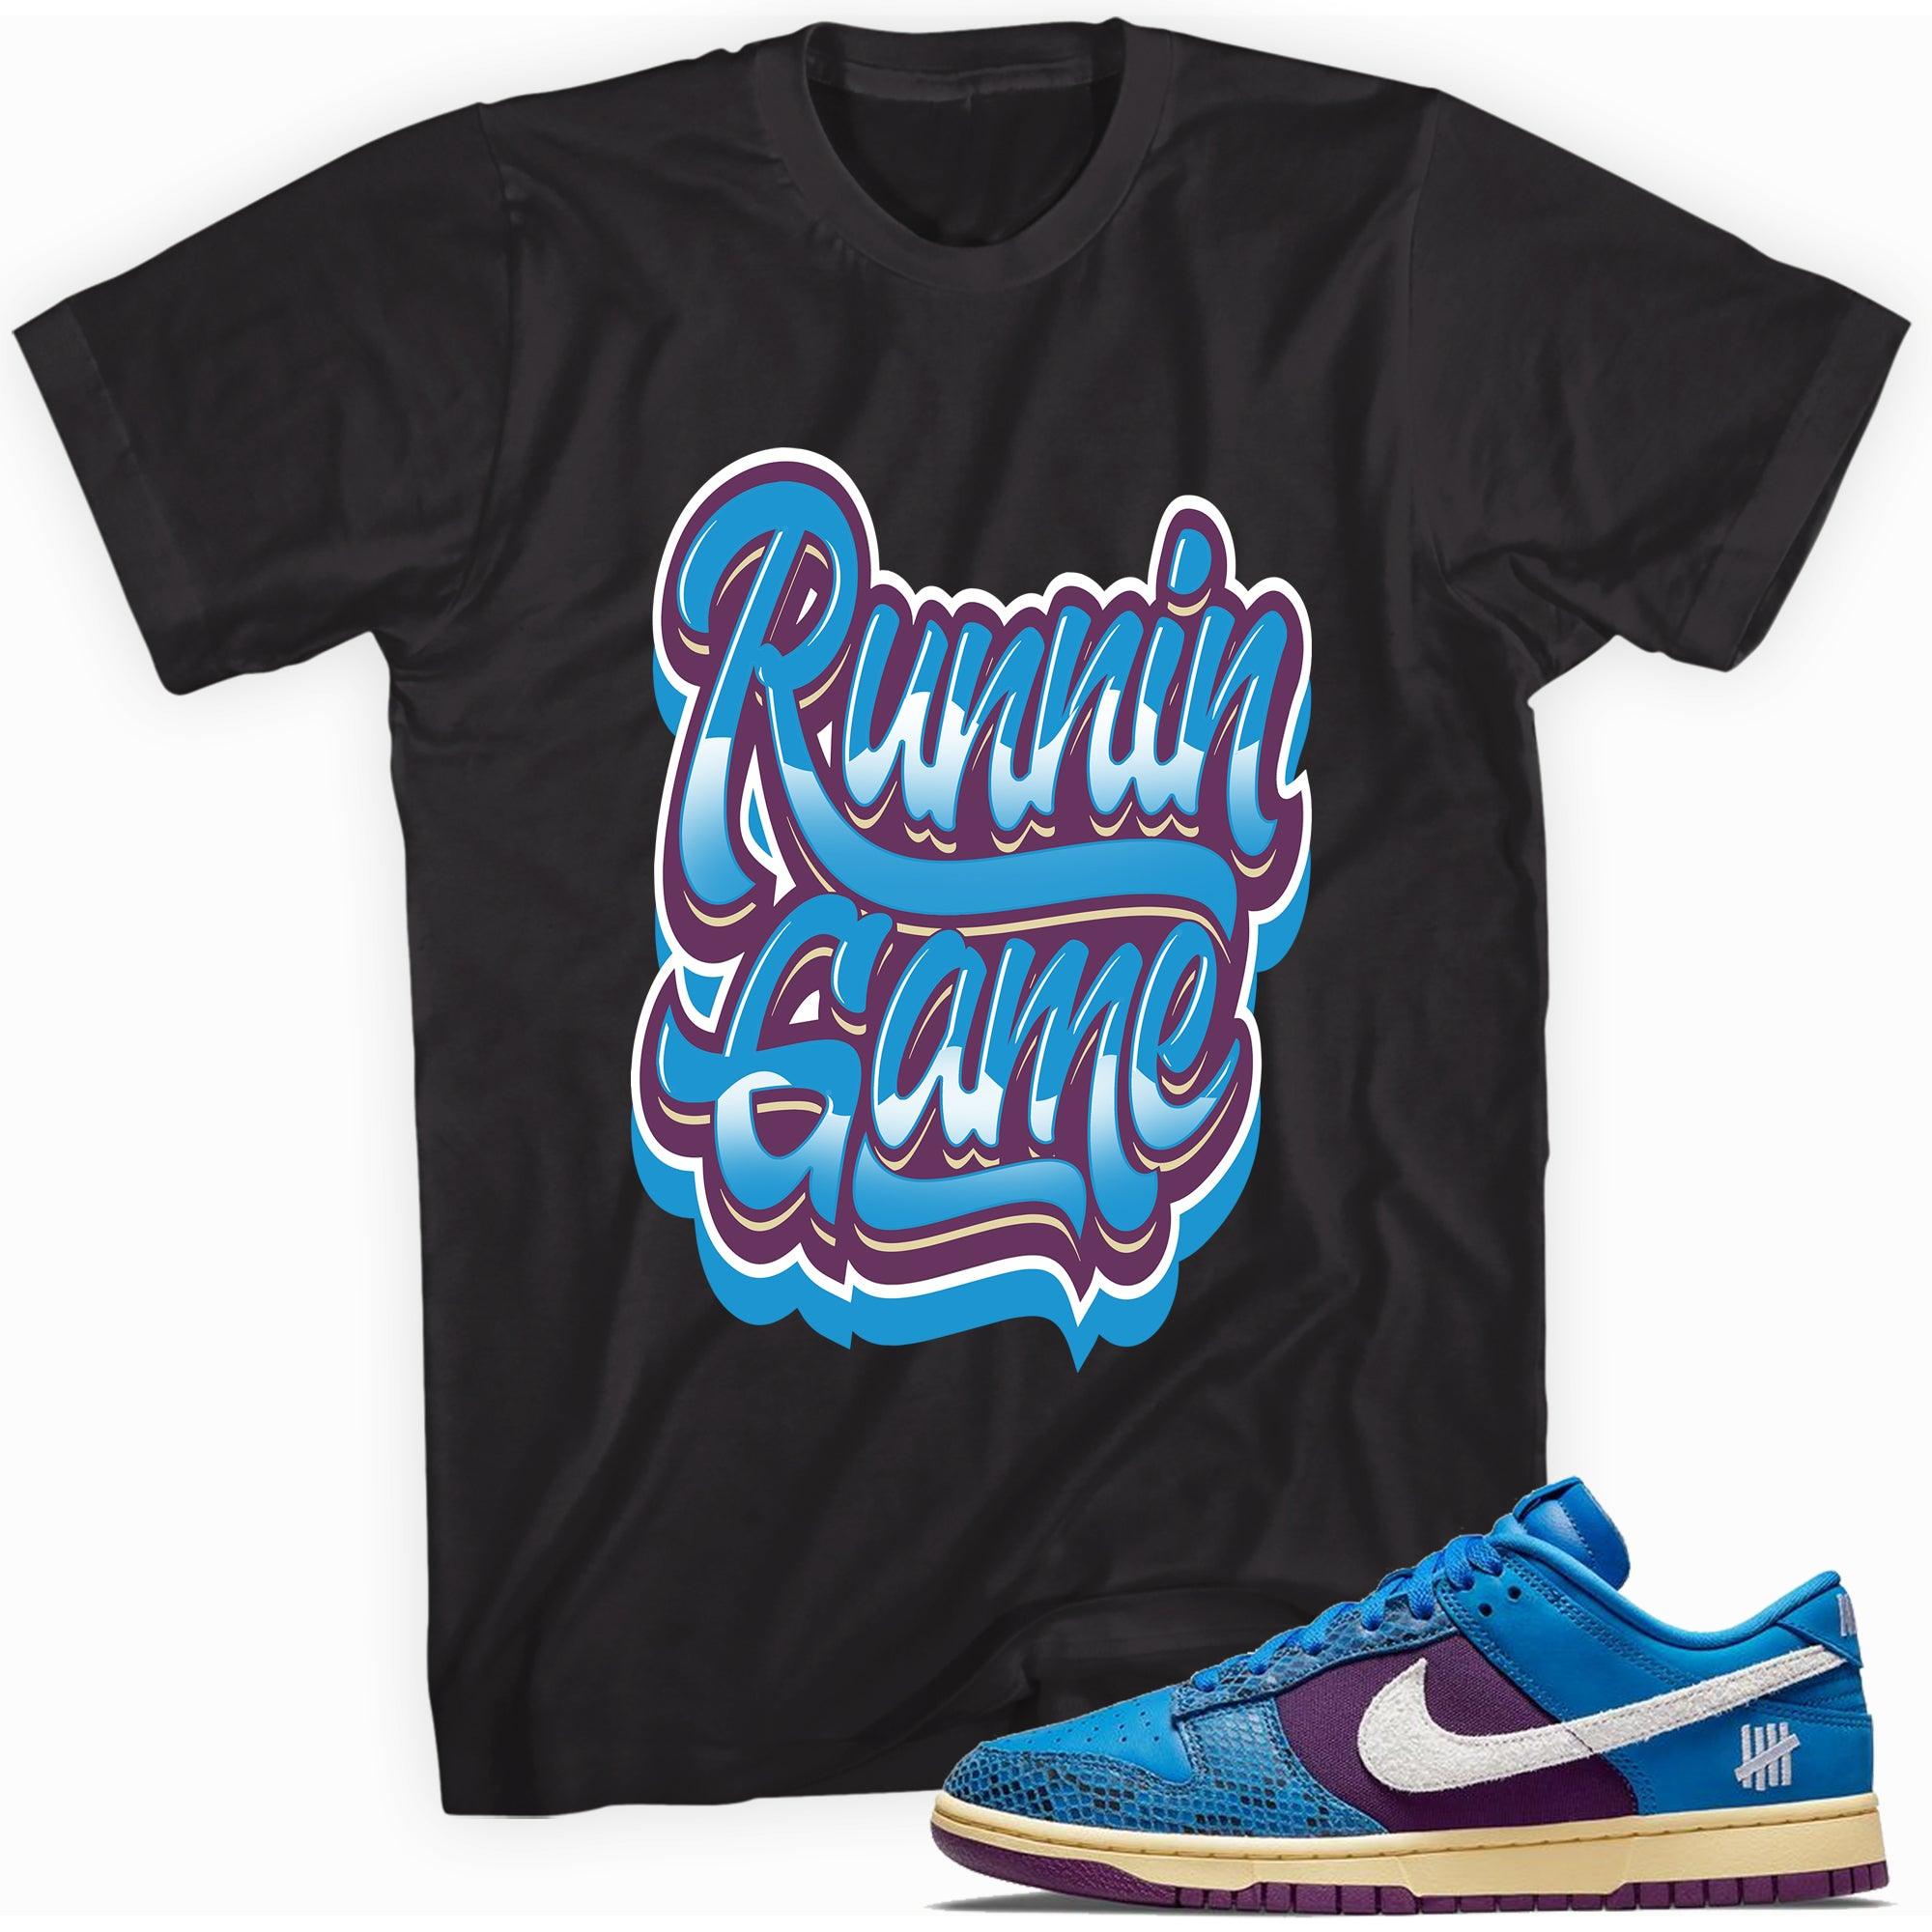 Runnin Game Shirt Nike Dunk Low Undefeated 5 On It Dunk vs AF1 photo